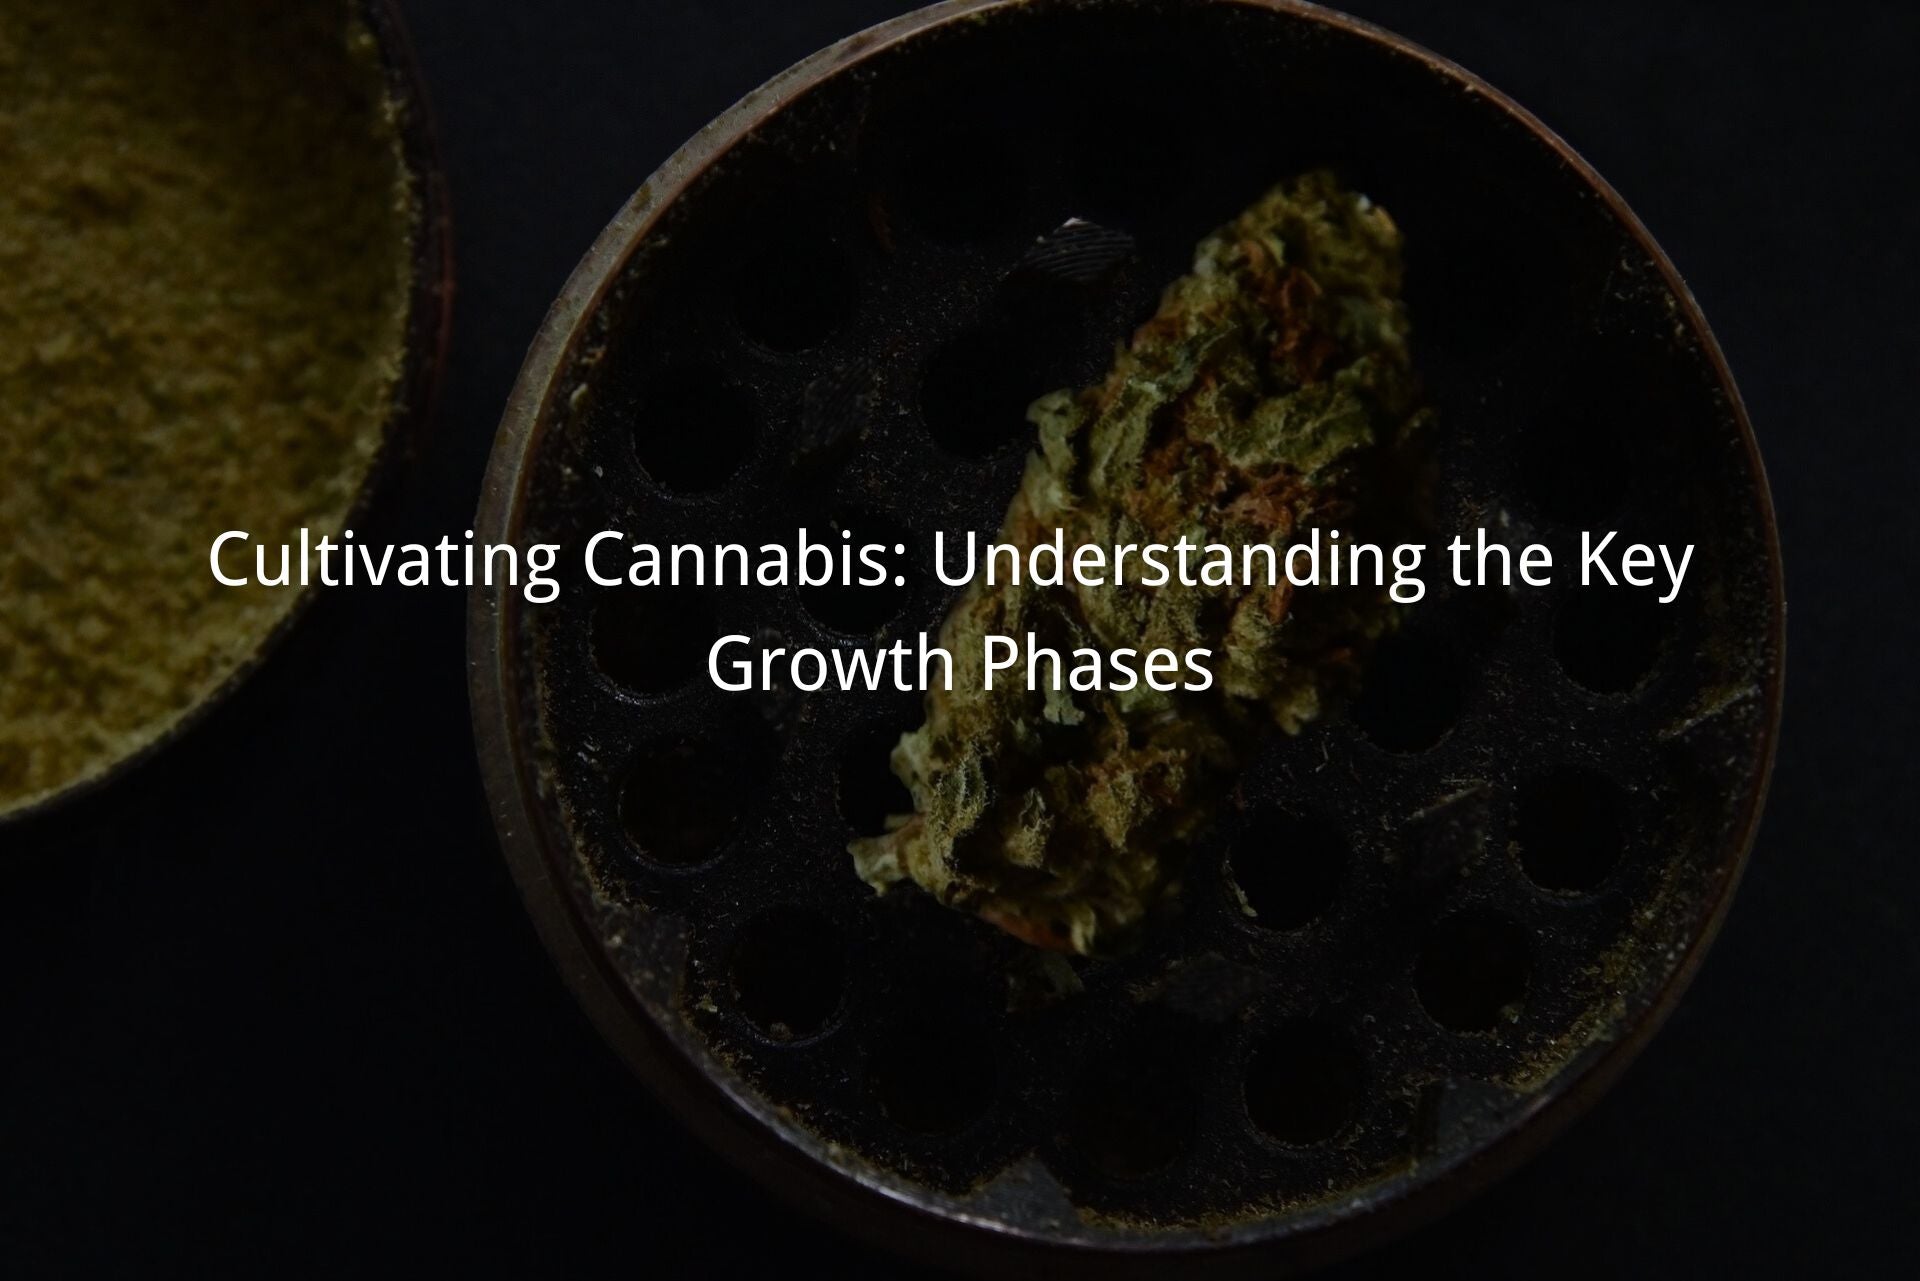 Cultivating Cannabis: Understanding the Key Growth Phases